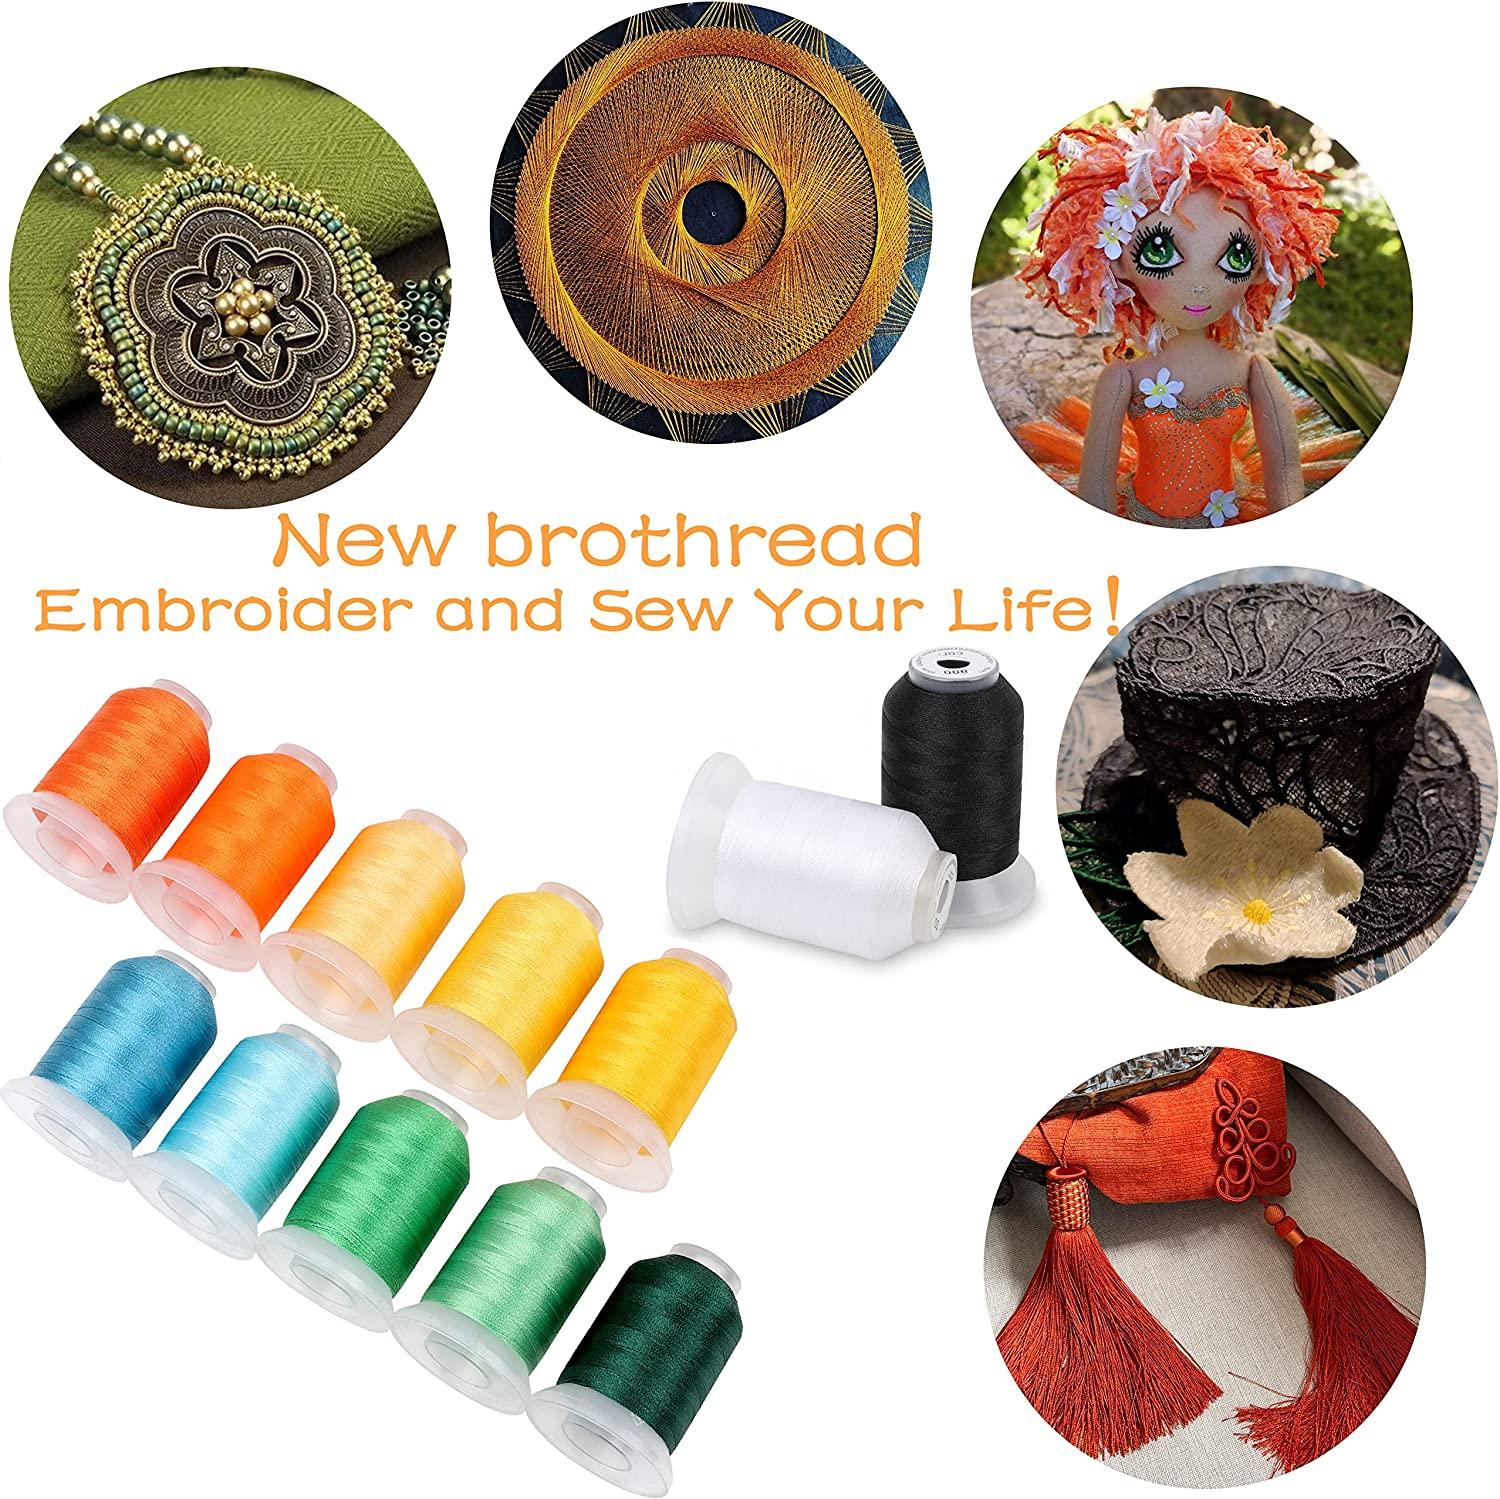 New brothread Embroidery, Sewing, Quilting